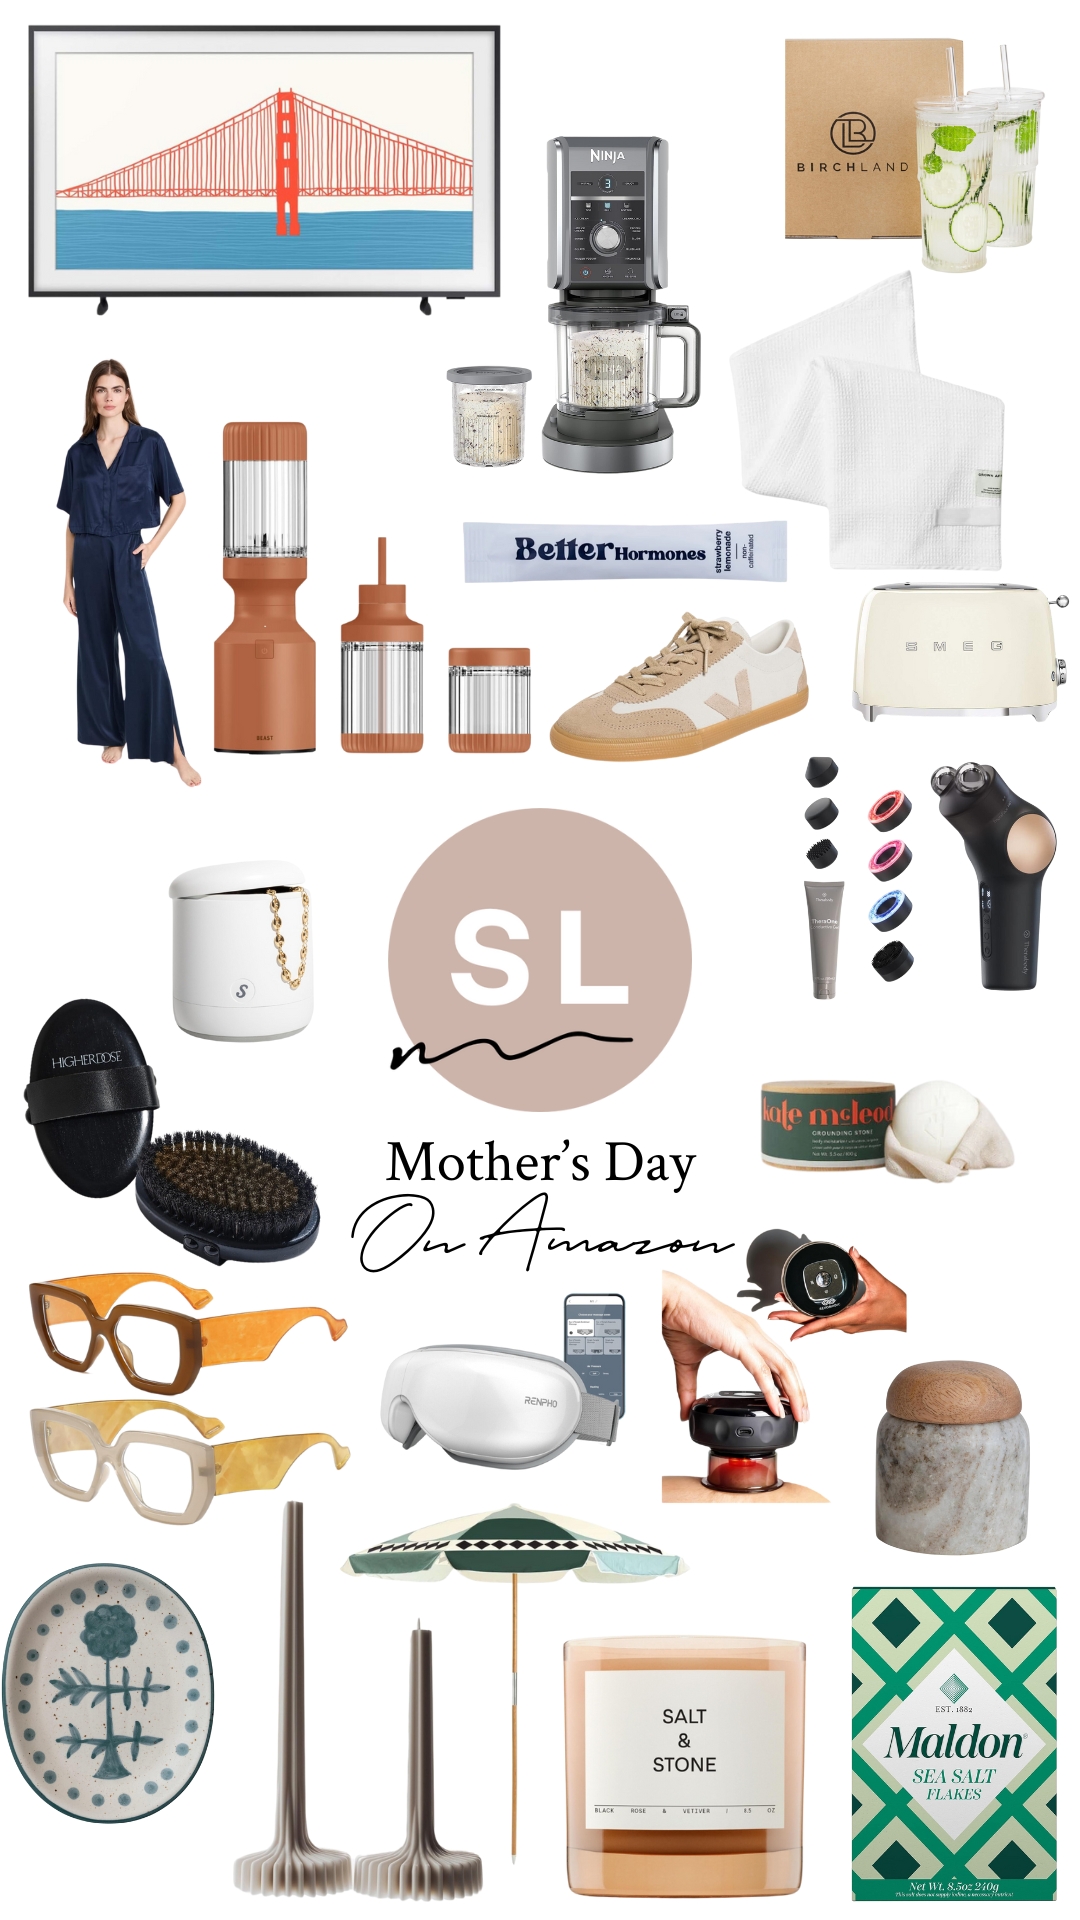 collage of Mother’s Day Gifts on Amazon